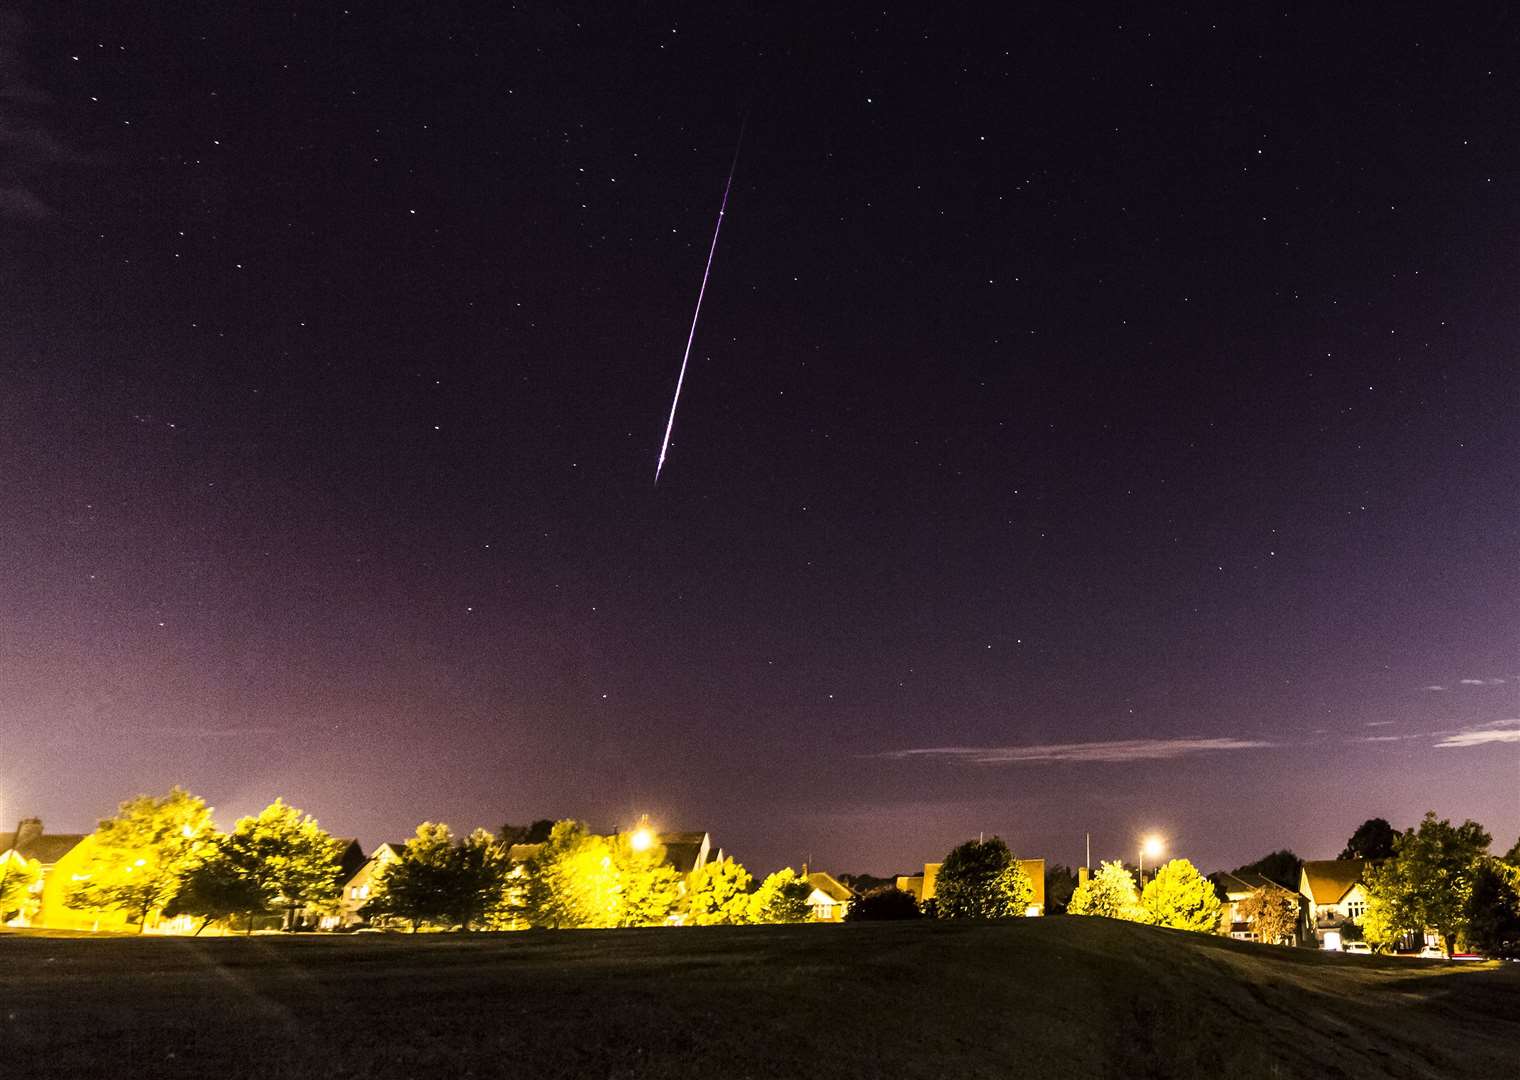 Medway Messenger reader Brian R. Obee took this picture on the night of the meteor shower in August, 2016